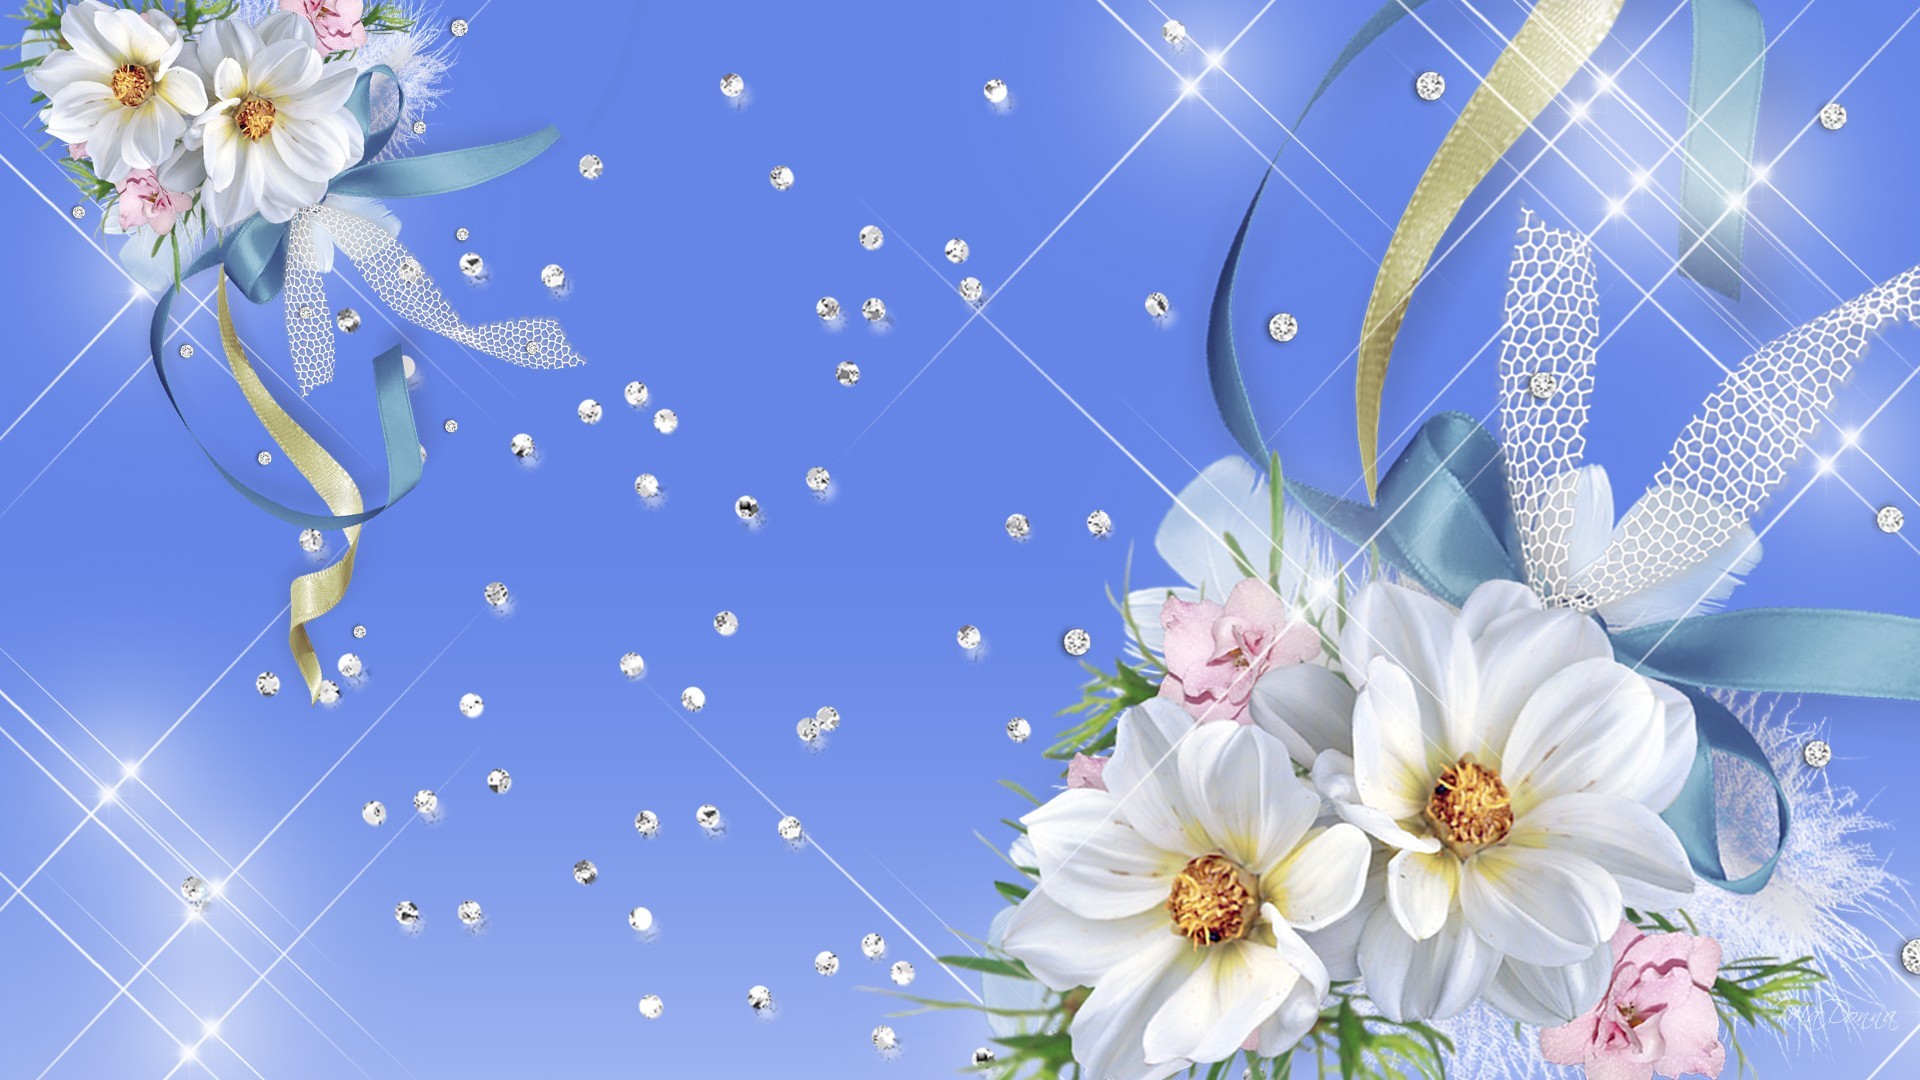 1920x1080 ... blue and white flower wallpaper flowers ideas ...